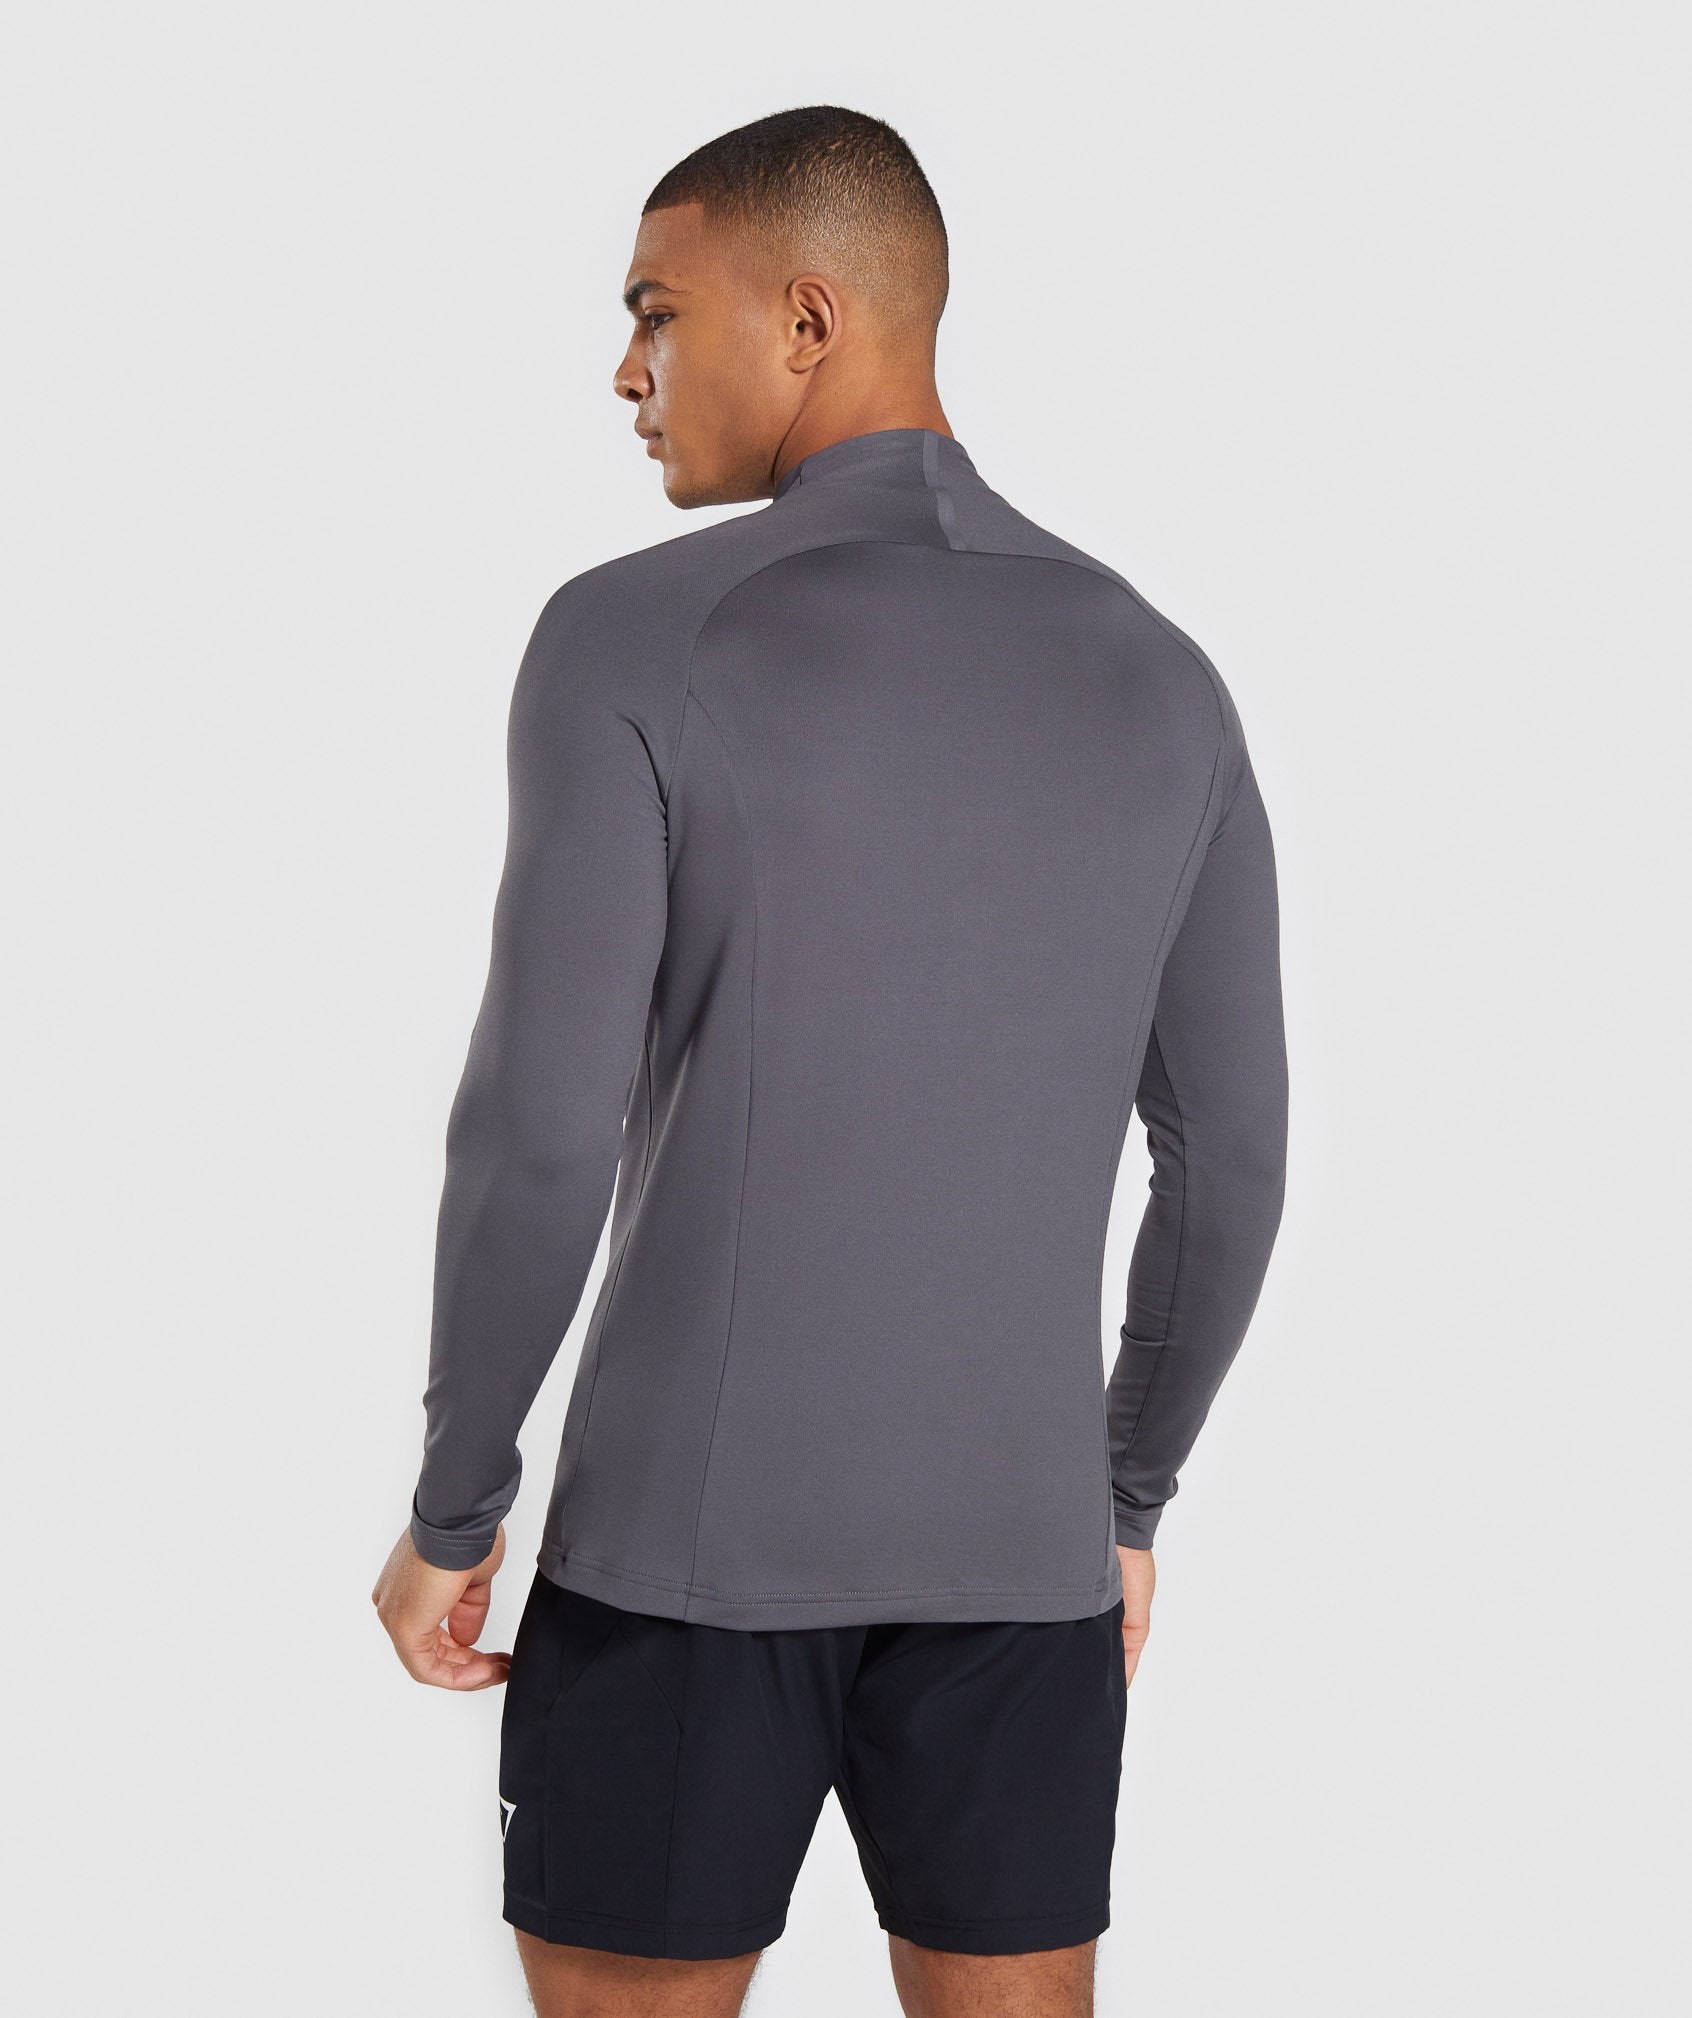 Advanced 1/4 Zip Pullover in Charcoal - view 2